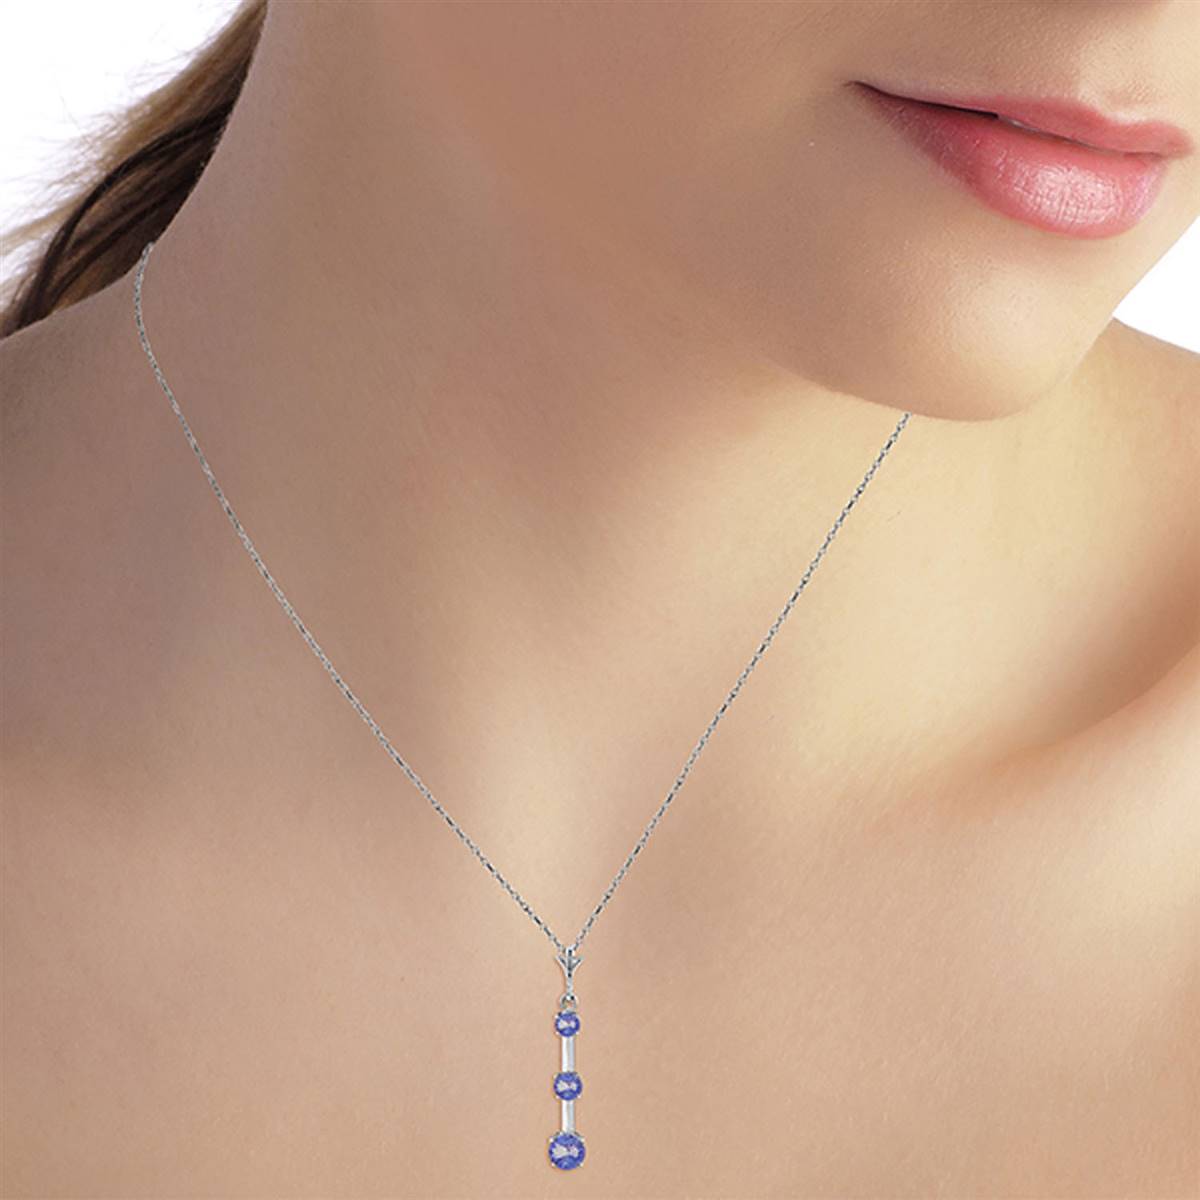 1.25 Carat 14K Solid White Gold Wished For Reaches Tanzanite Necklace